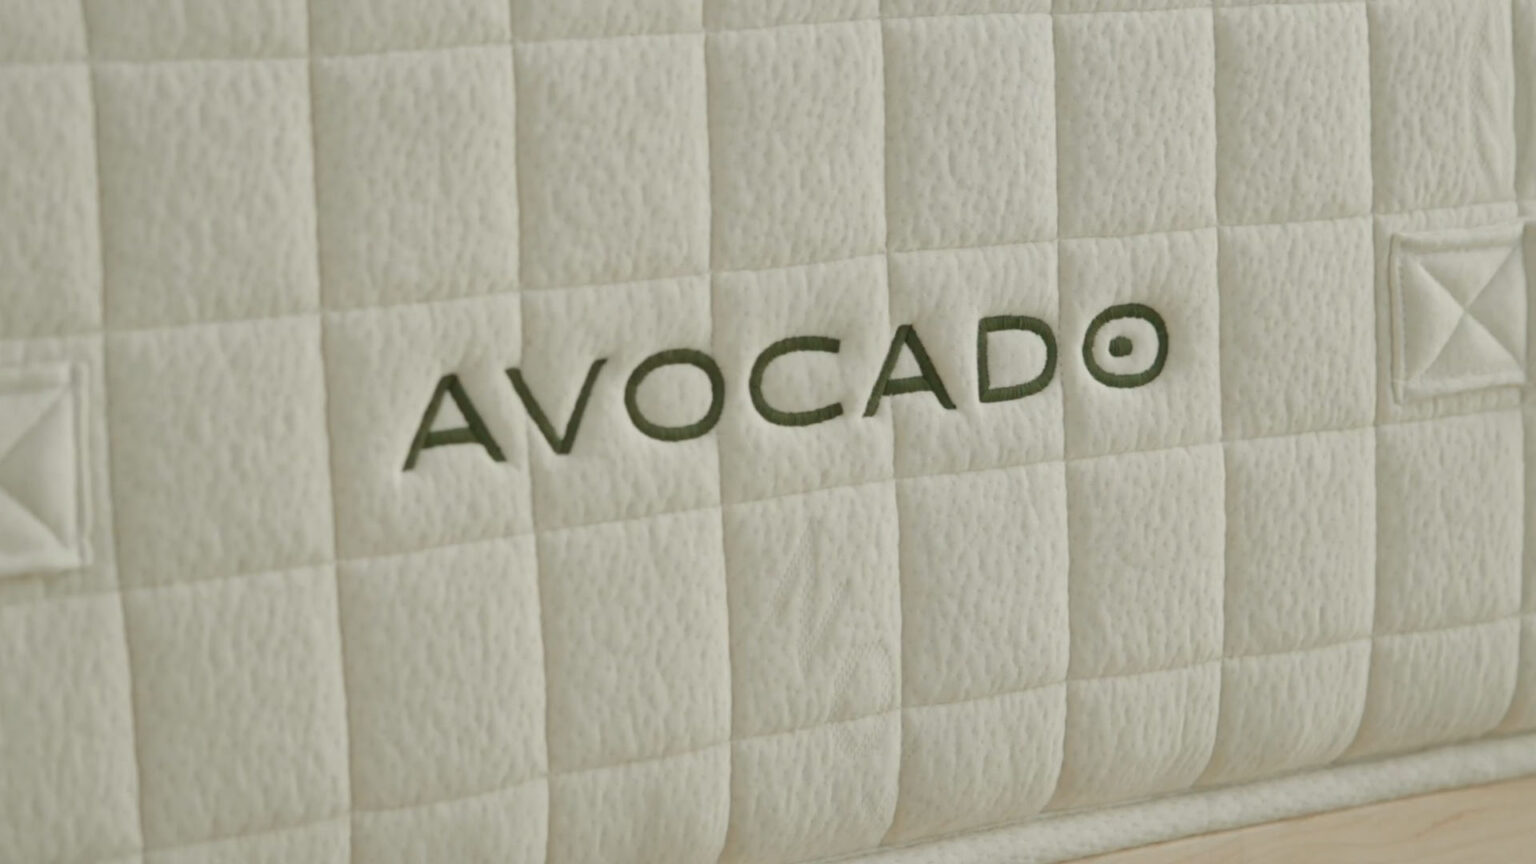 Avocado Mattress delivers to Fort Lauderdale